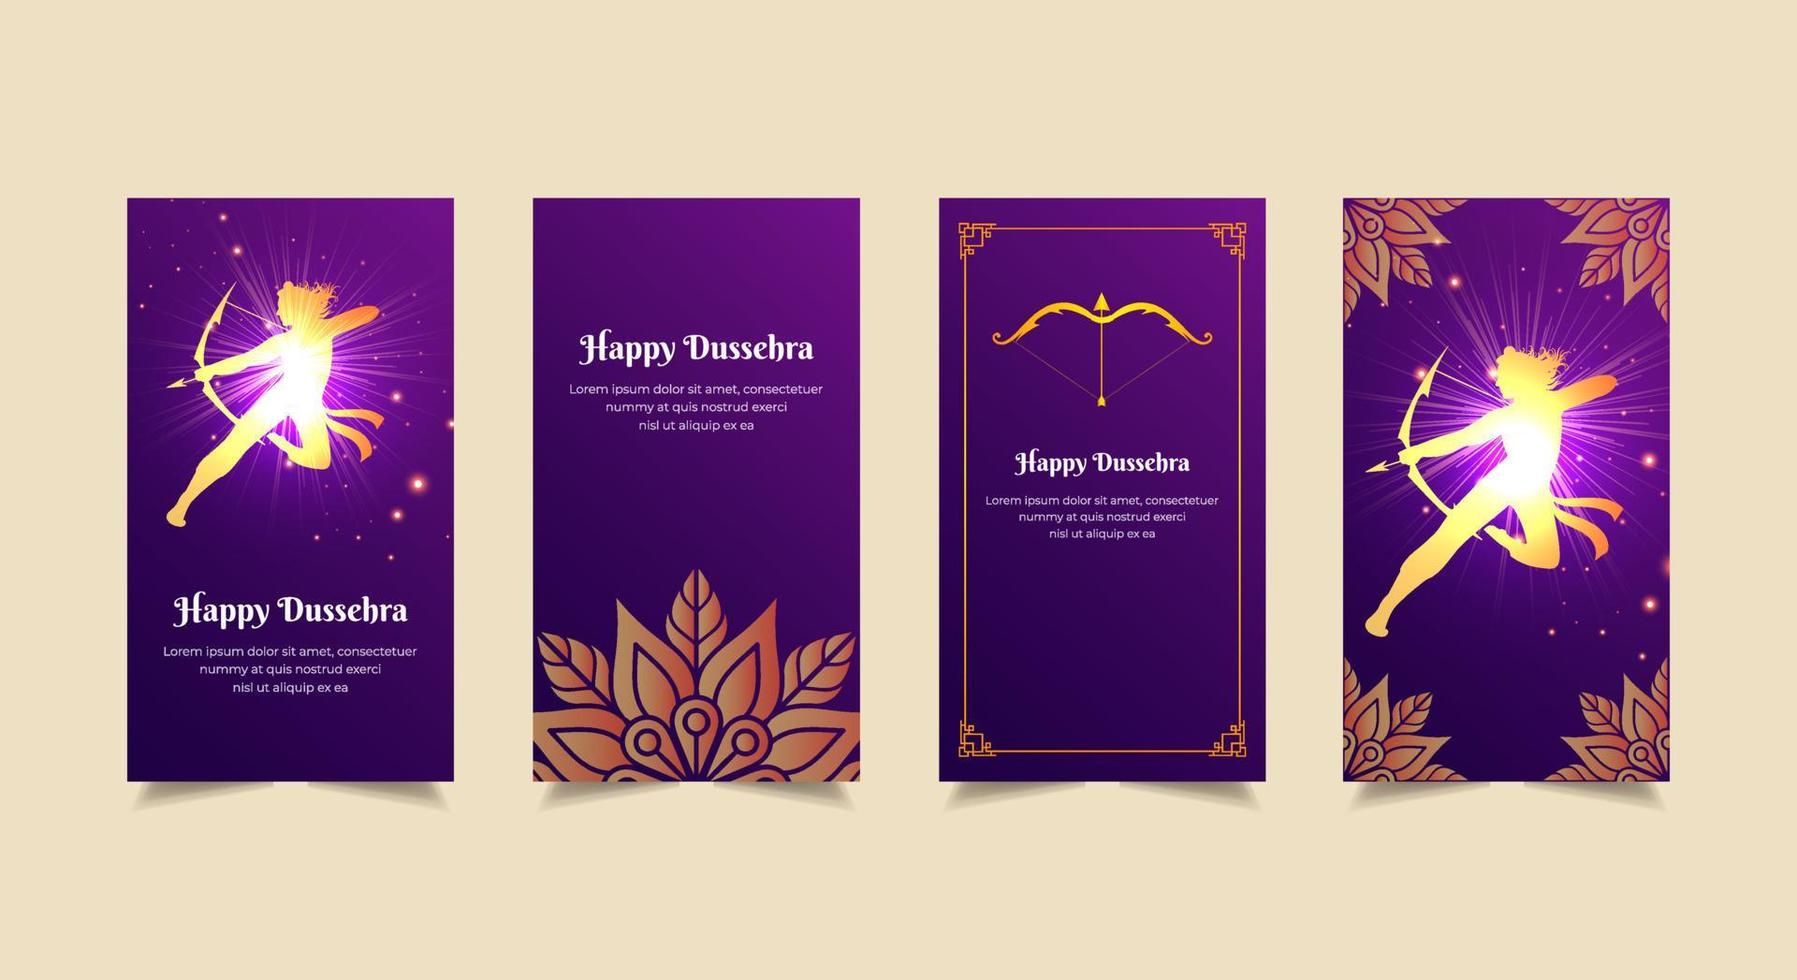 Celebration Dussehra day background with shinny lord rama silhouette. Dussehra day design Stories Collection. Dussehra day template stories suitable for promotion, marketing etc. vector